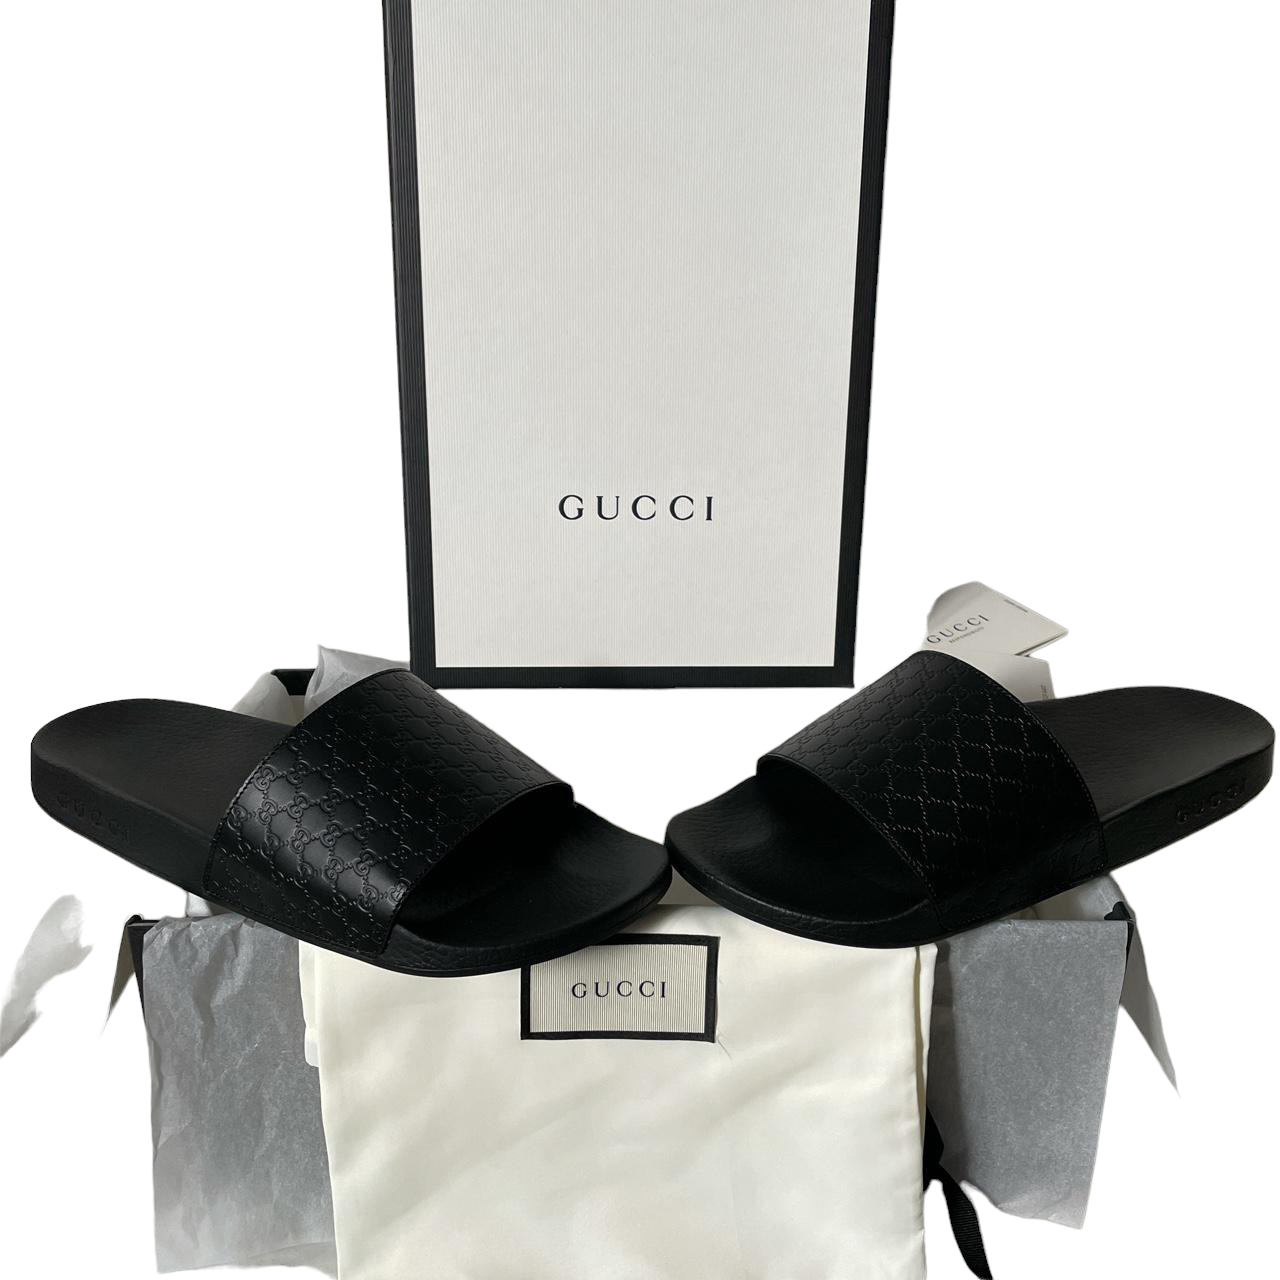 GUCCI GG LEATHER EMBOSSED SLIDERS - BLACK